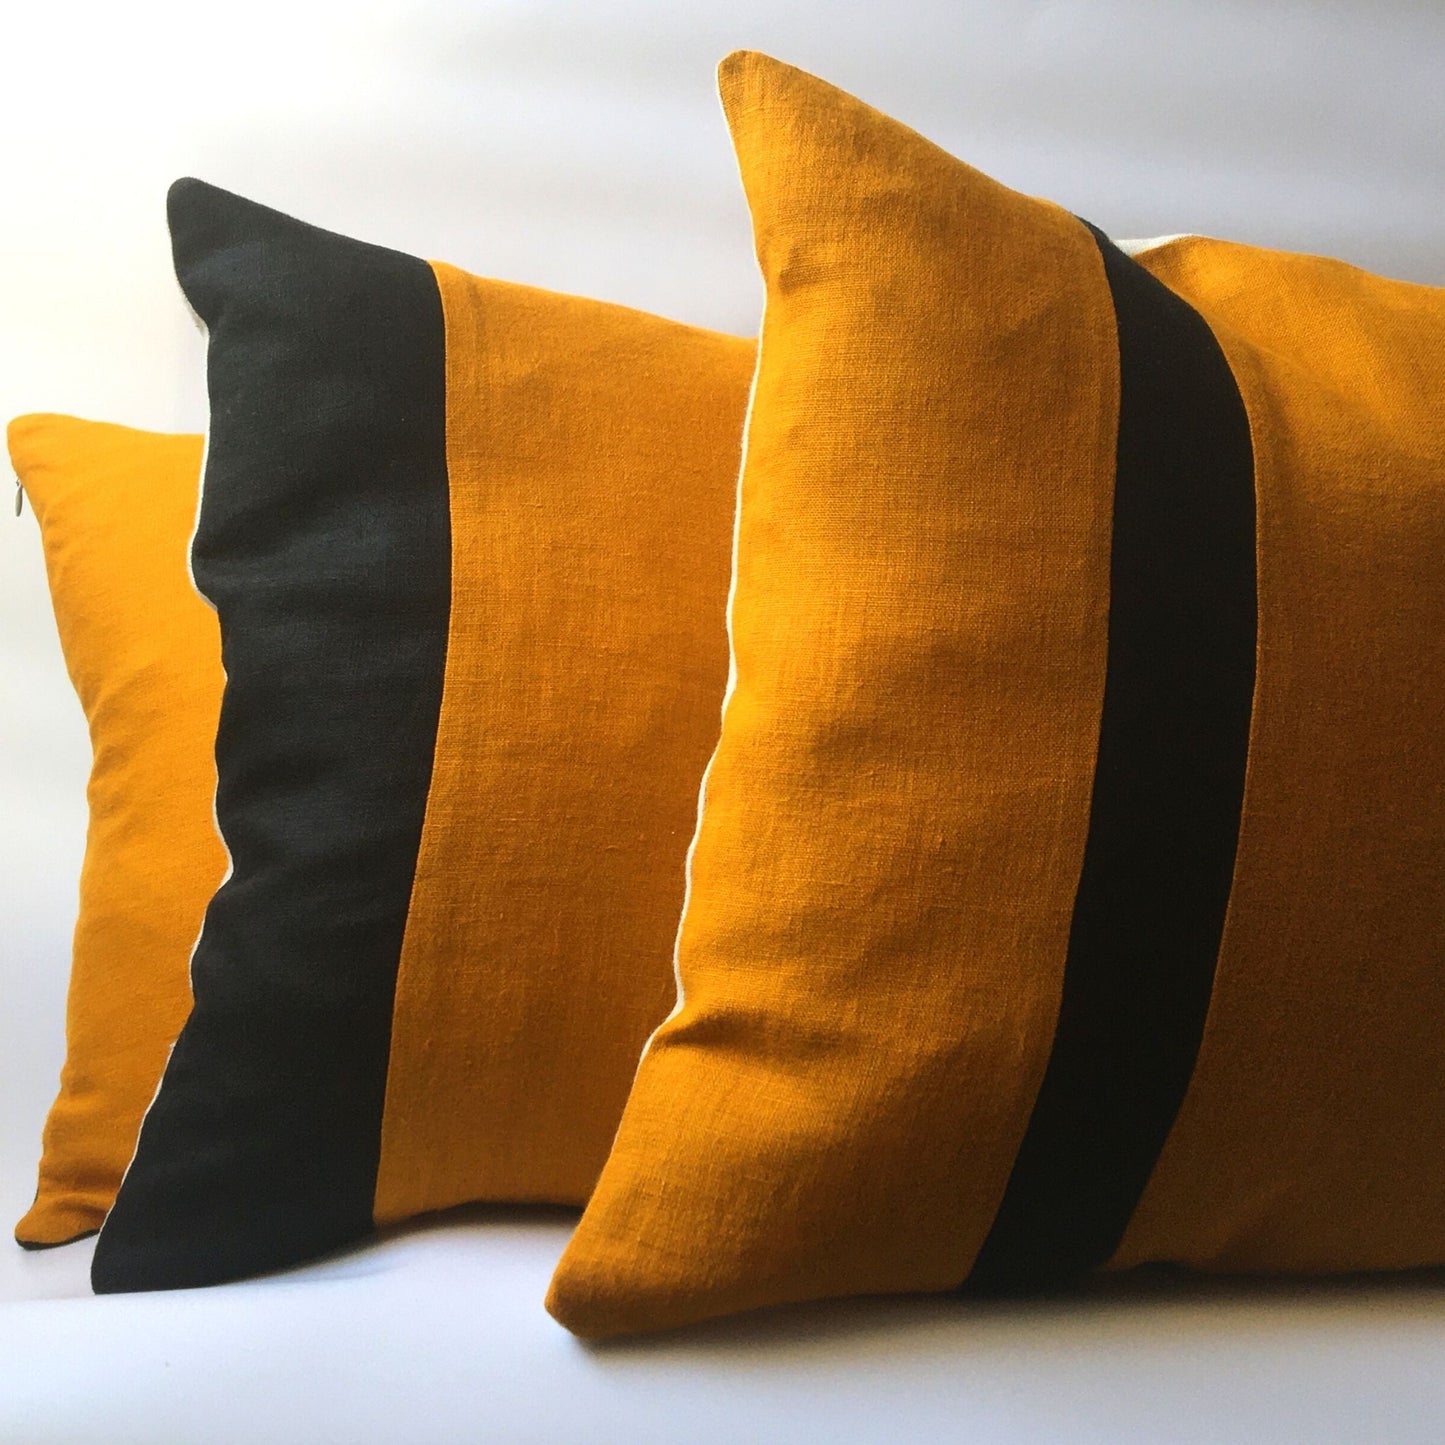 Bee cushion cover collection, three cushions stacked